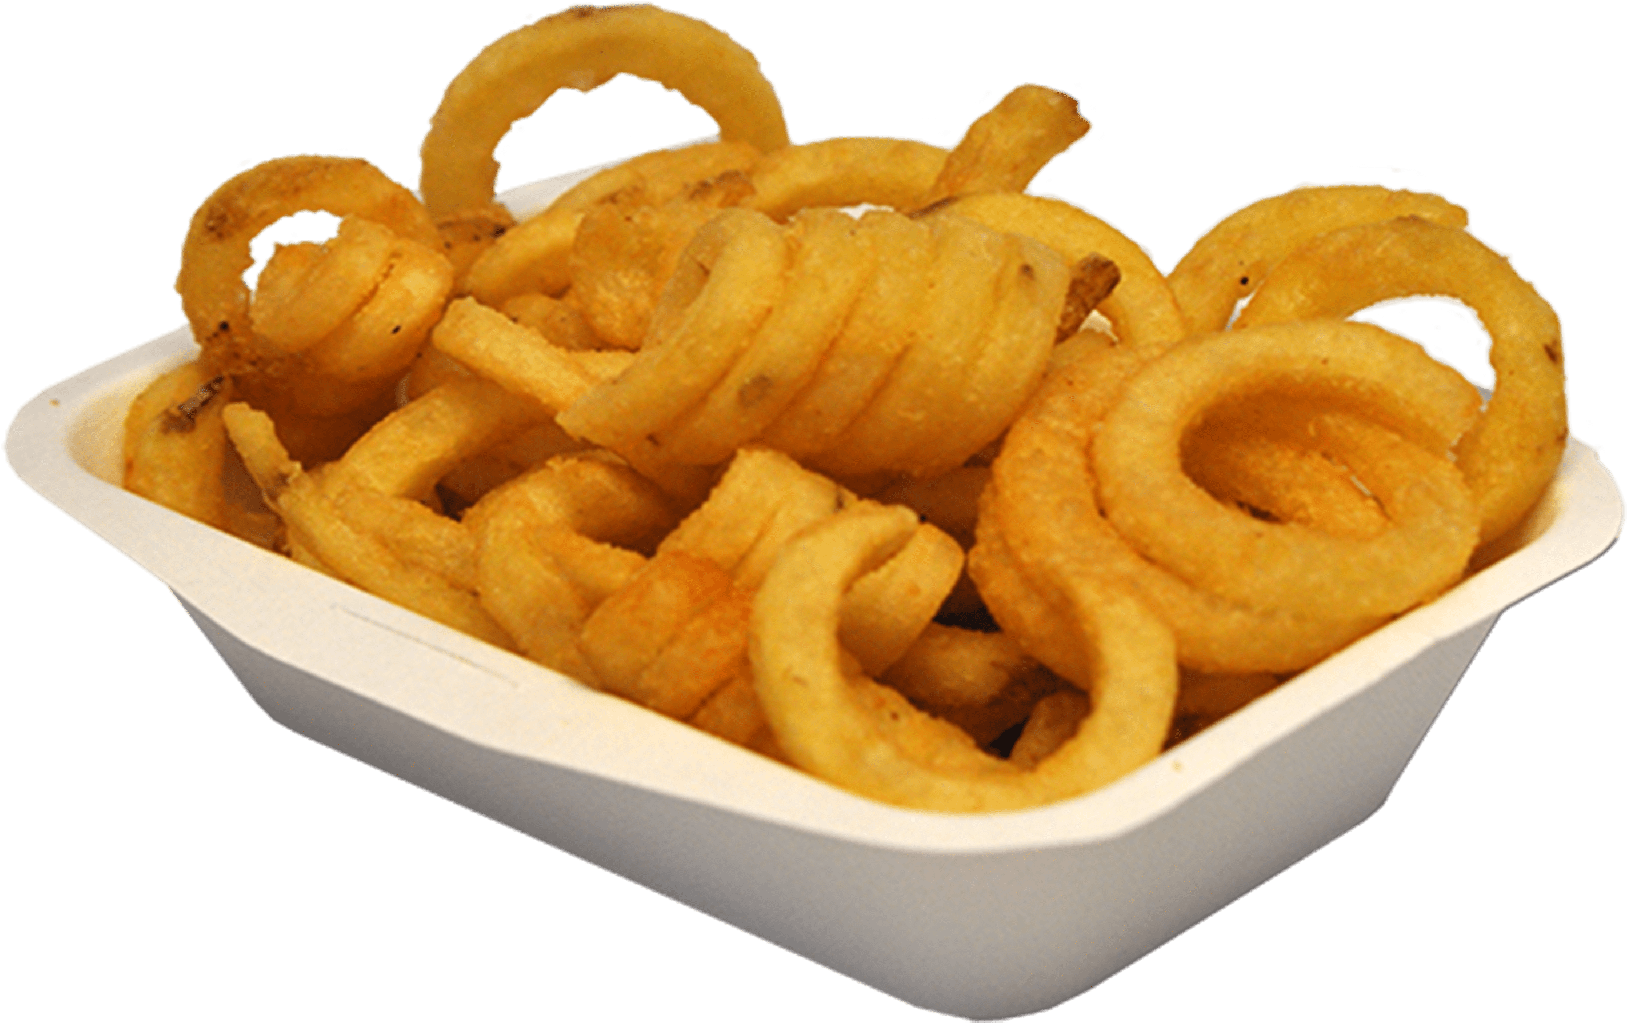 A White Container With Curly Fries